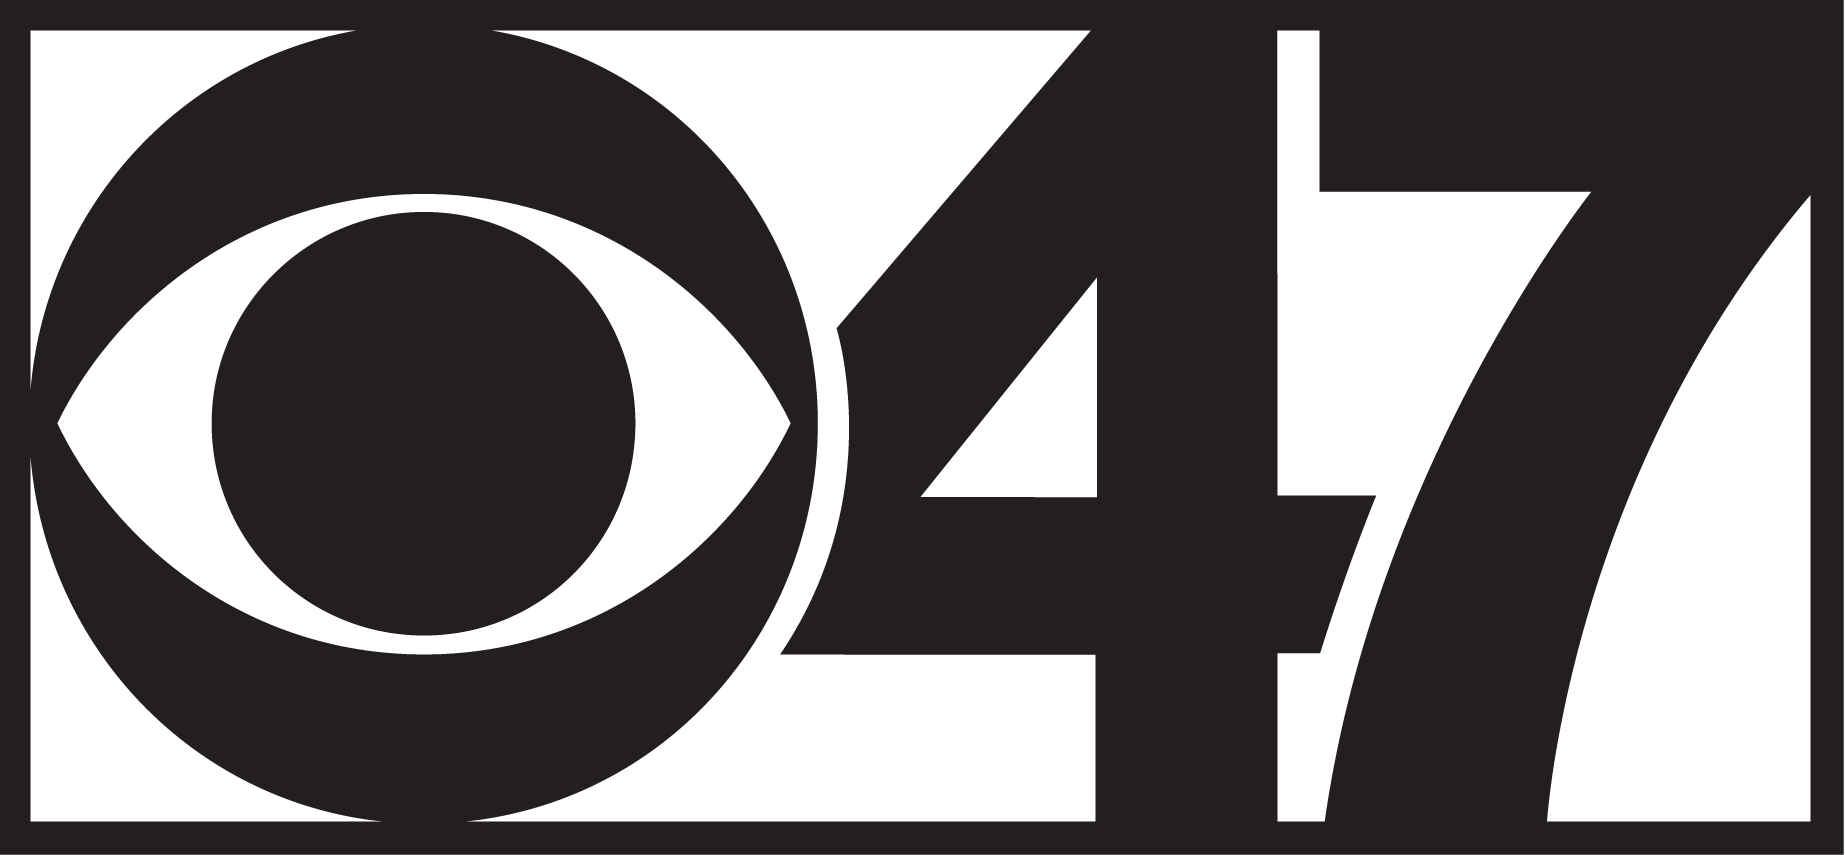 C B S Channel47 Logo PNG